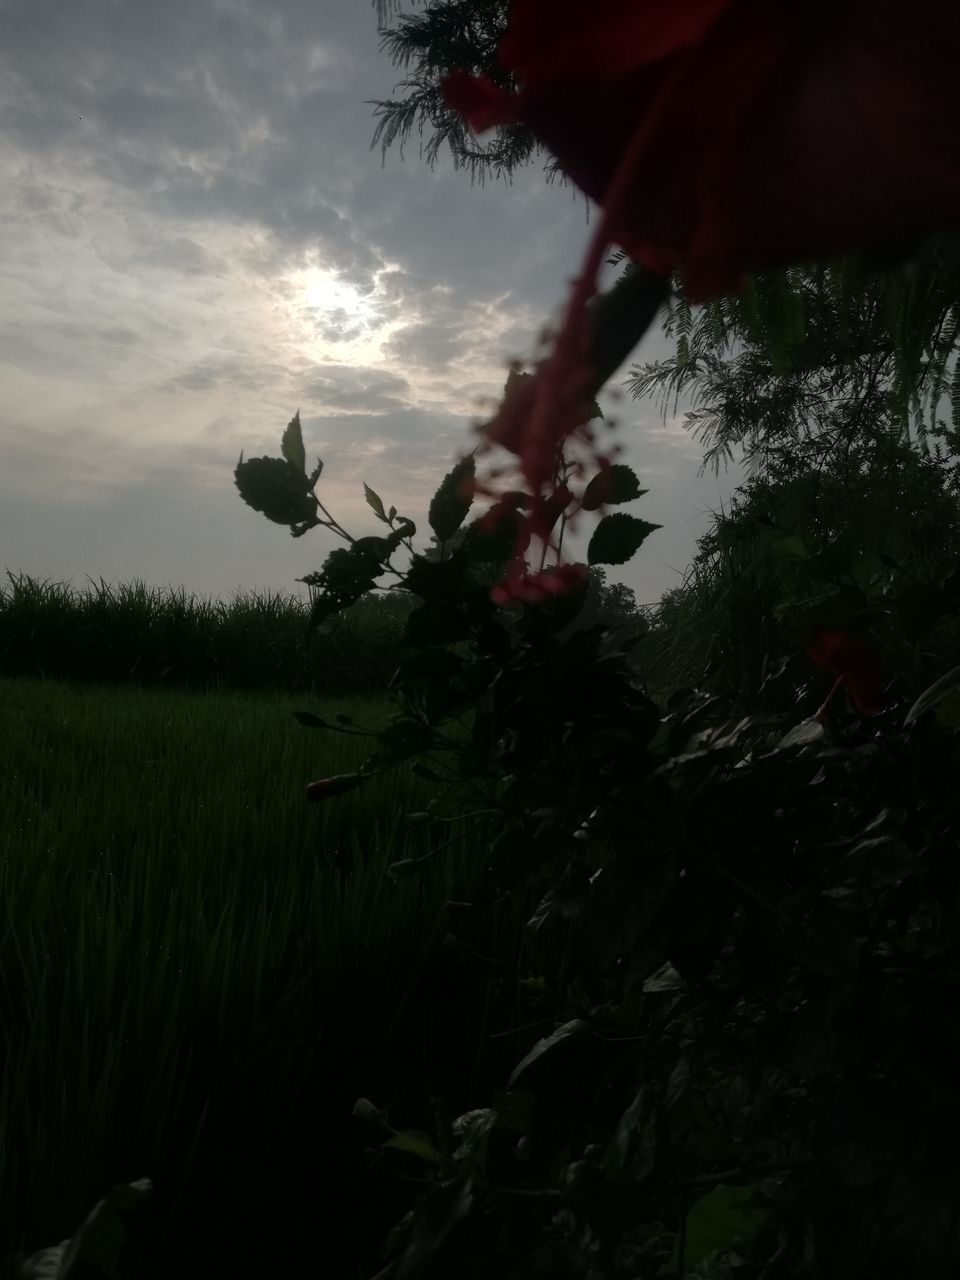 plant, sky, nature, growth, flower, cloud, land, tree, one person, sunlight, field, agriculture, darkness, beauty in nature, crop, morning, outdoors, landscape, grass, rural scene, leaf, adult, food, environment